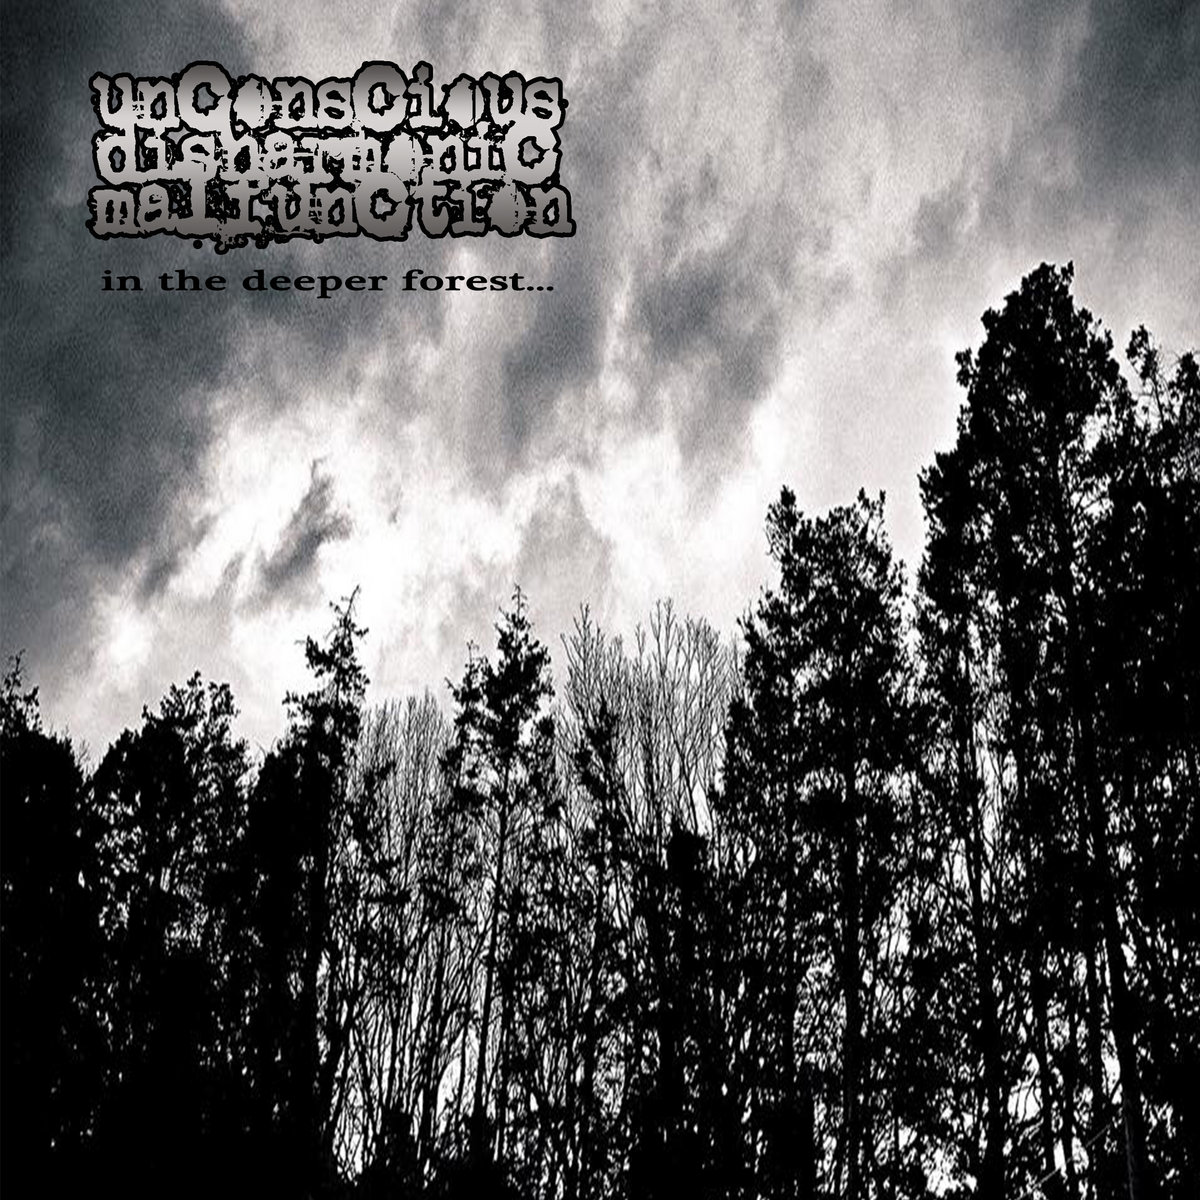 UNCONSCIOUS DISHARMONIC MALFUNCTION - More Noise For Life / In The Deeper Forest... cover 